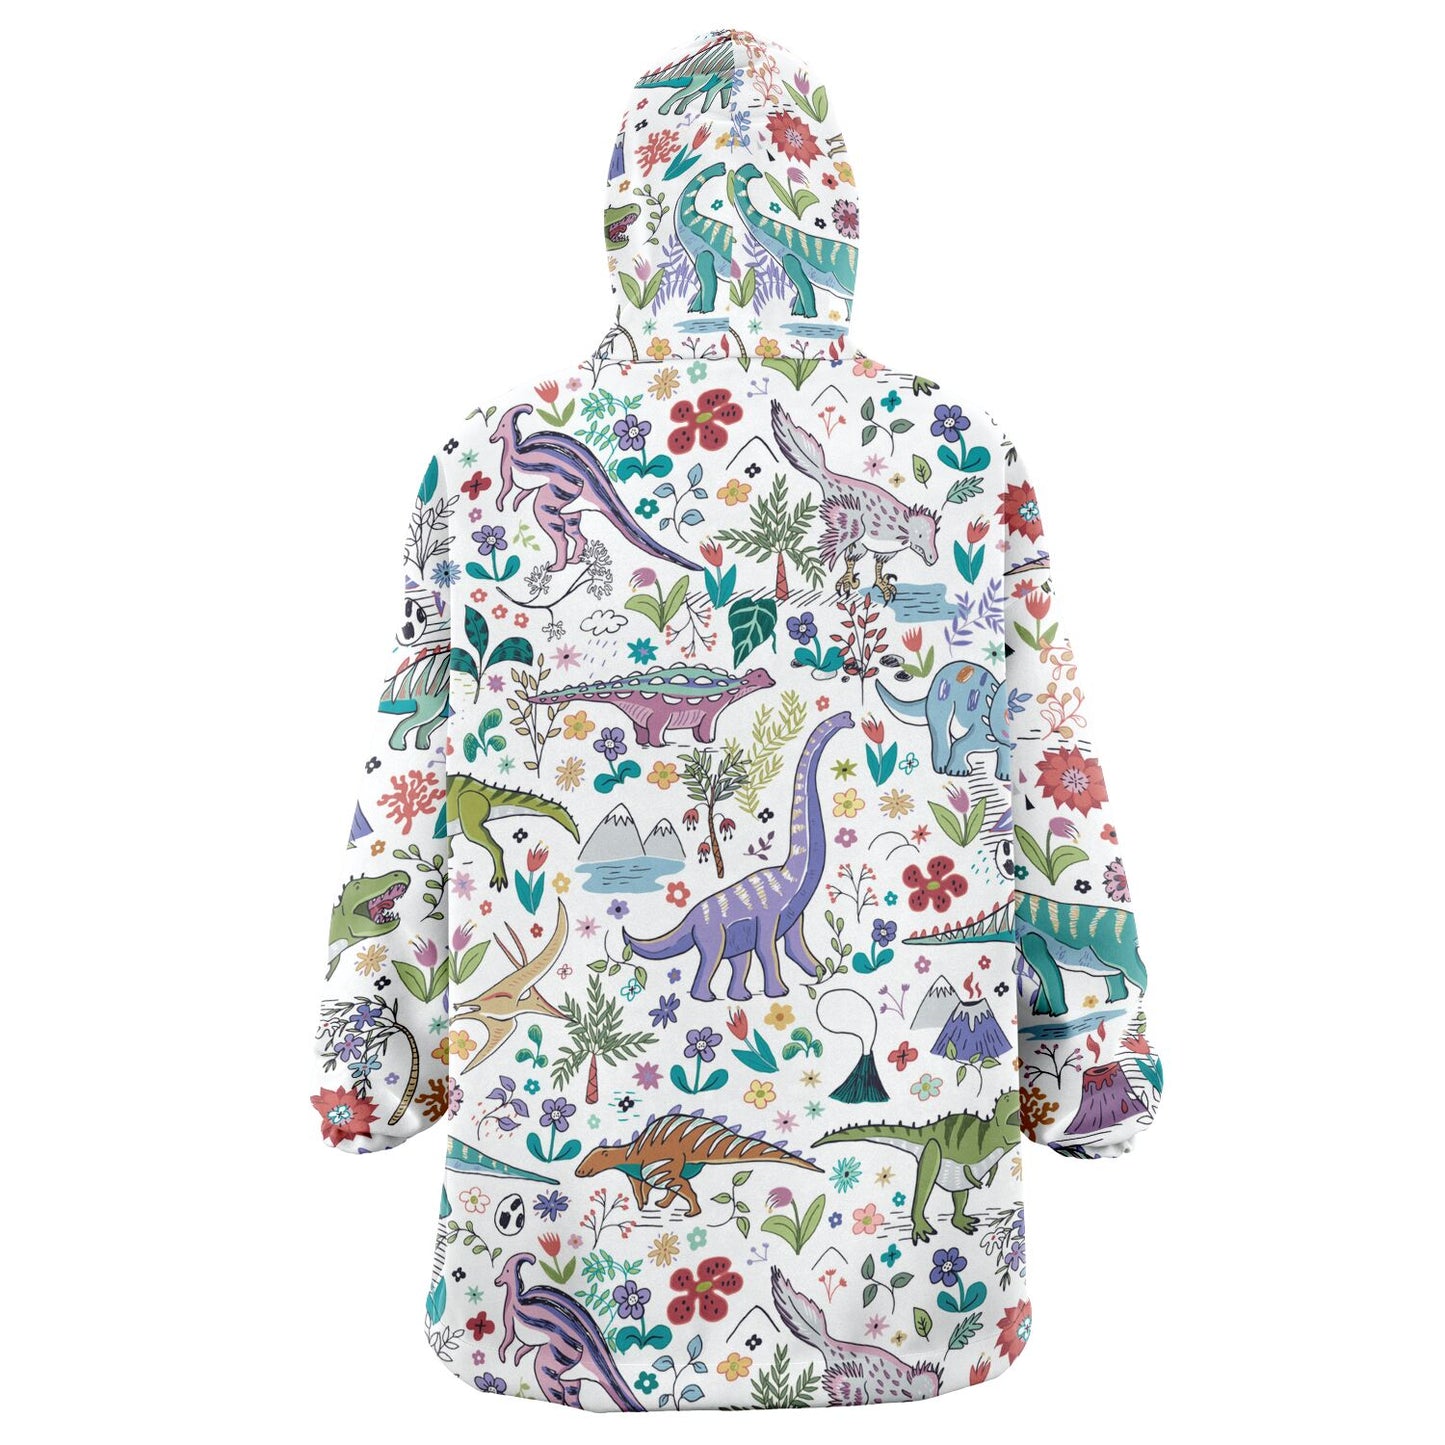 Dinosour Snug Hoodie for her or him.